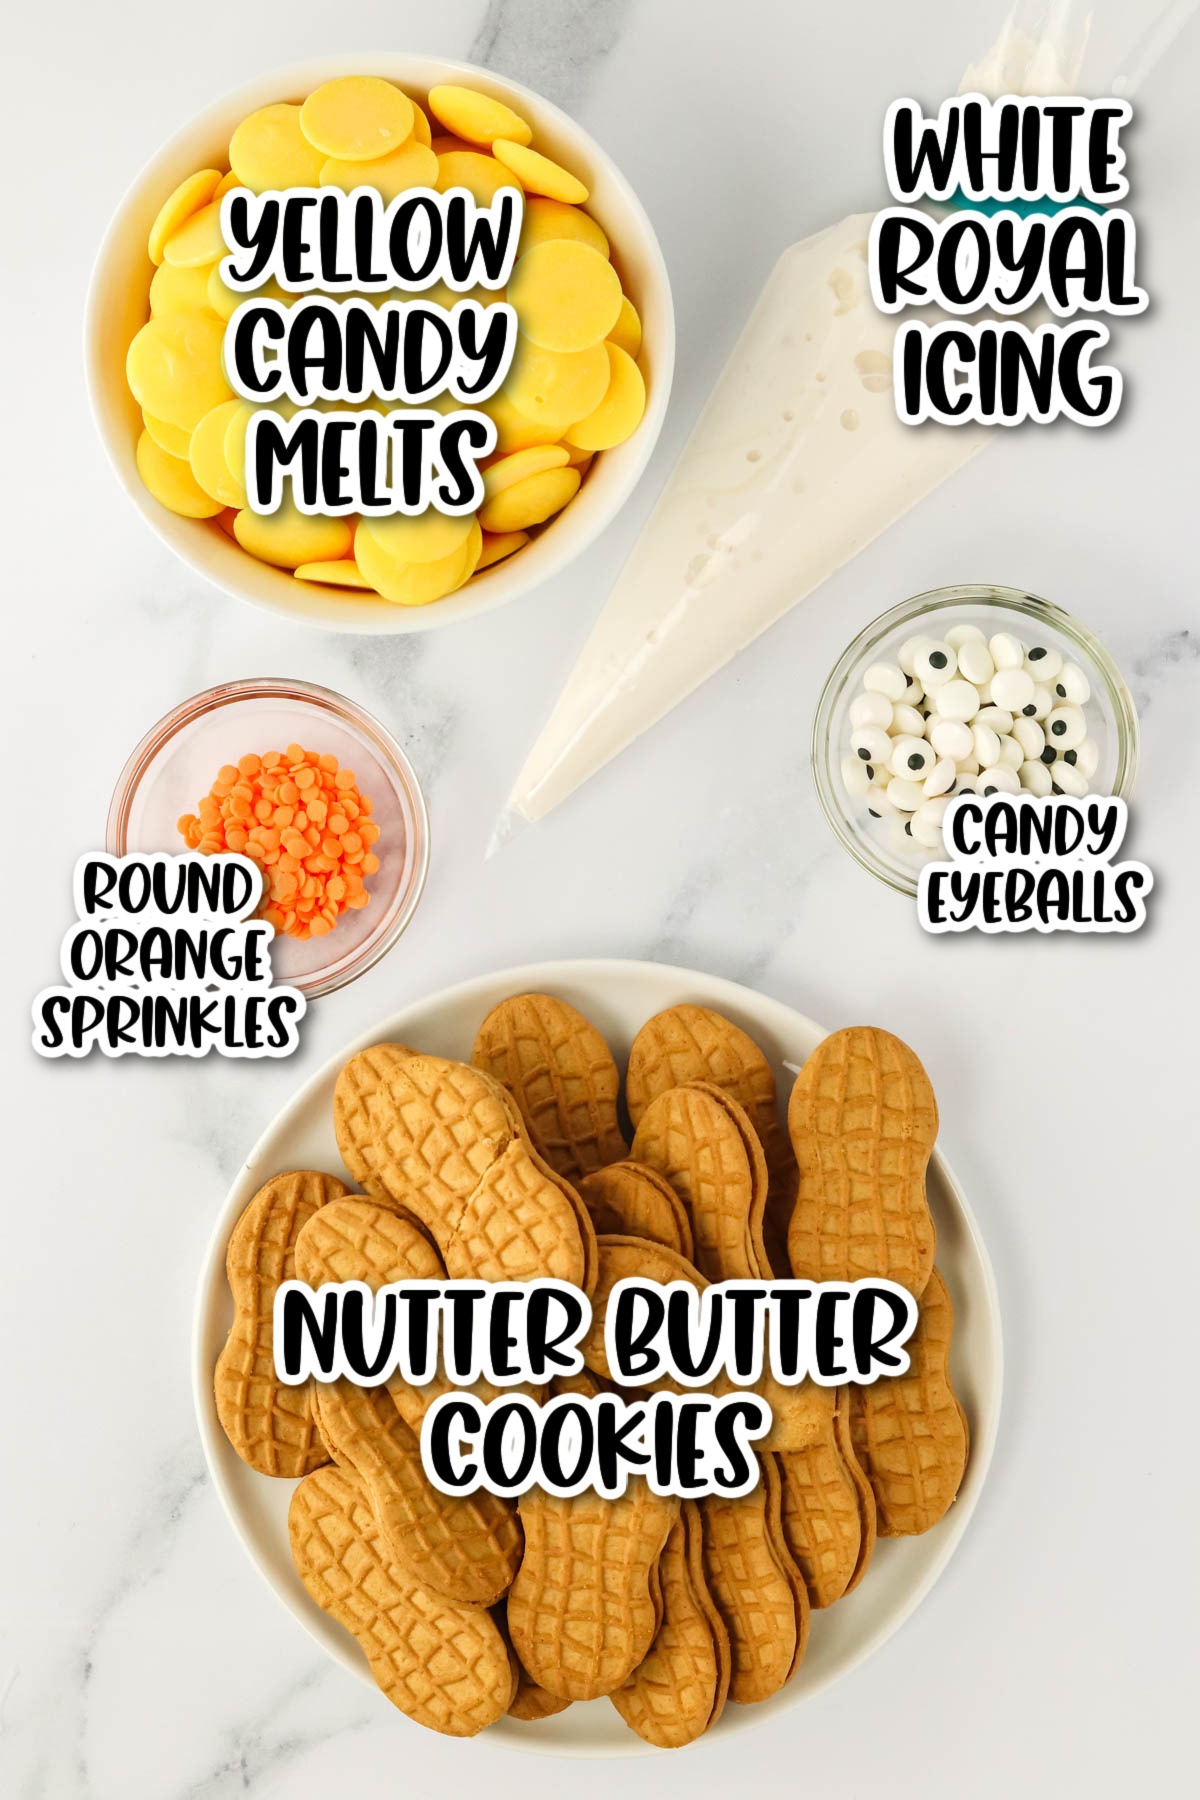 Ingredients for making decorated cookies: yellow candy melts, white royal icing, round orange sprinkles, candy eyeballs, and nutter butter cookies.